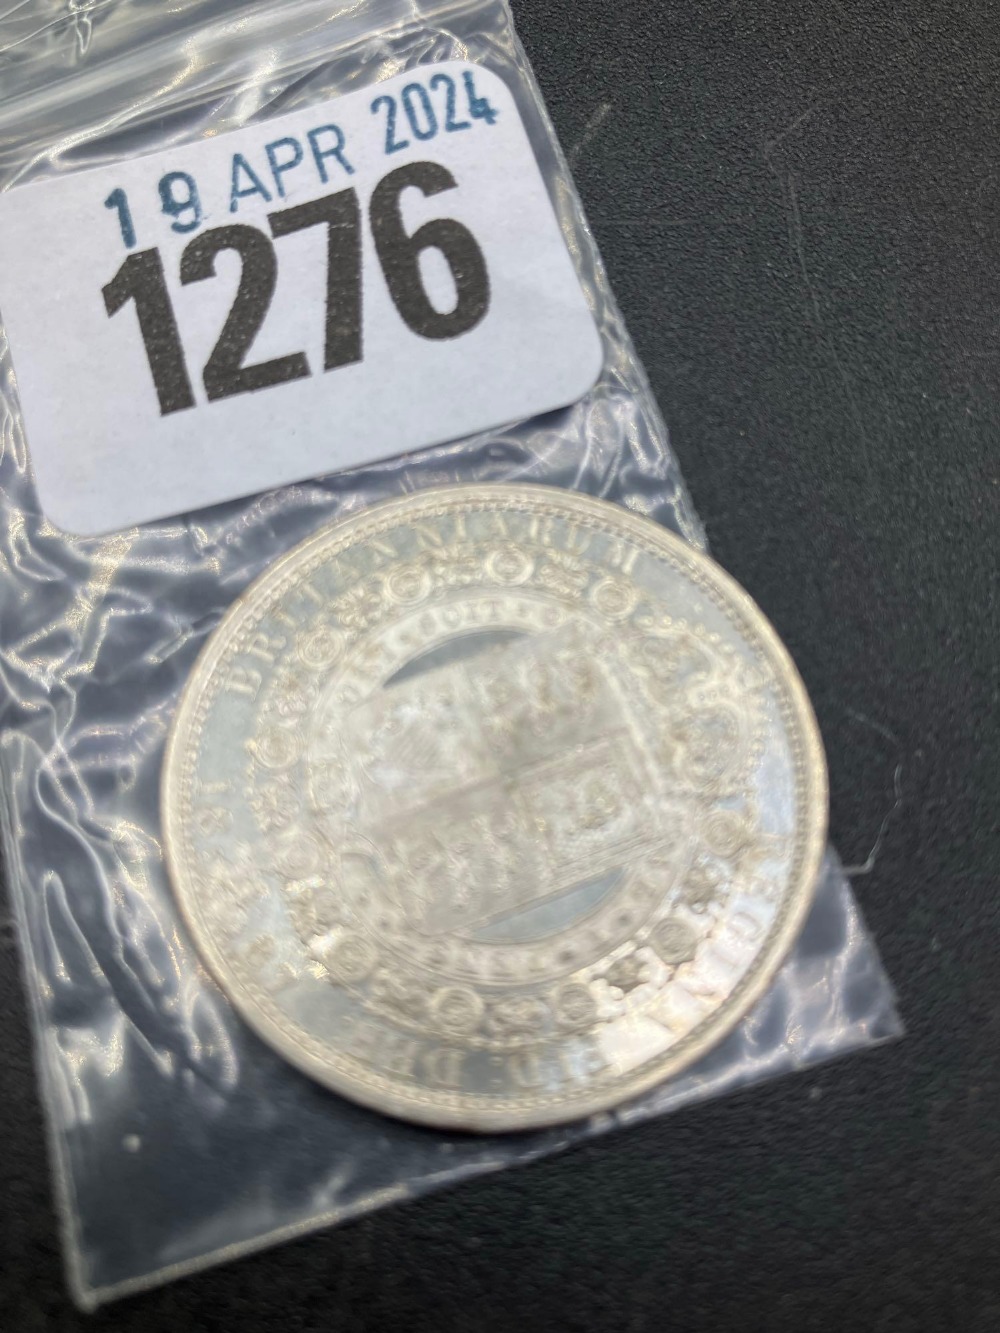 1887 Halfcrown near mint condition - Image 2 of 2